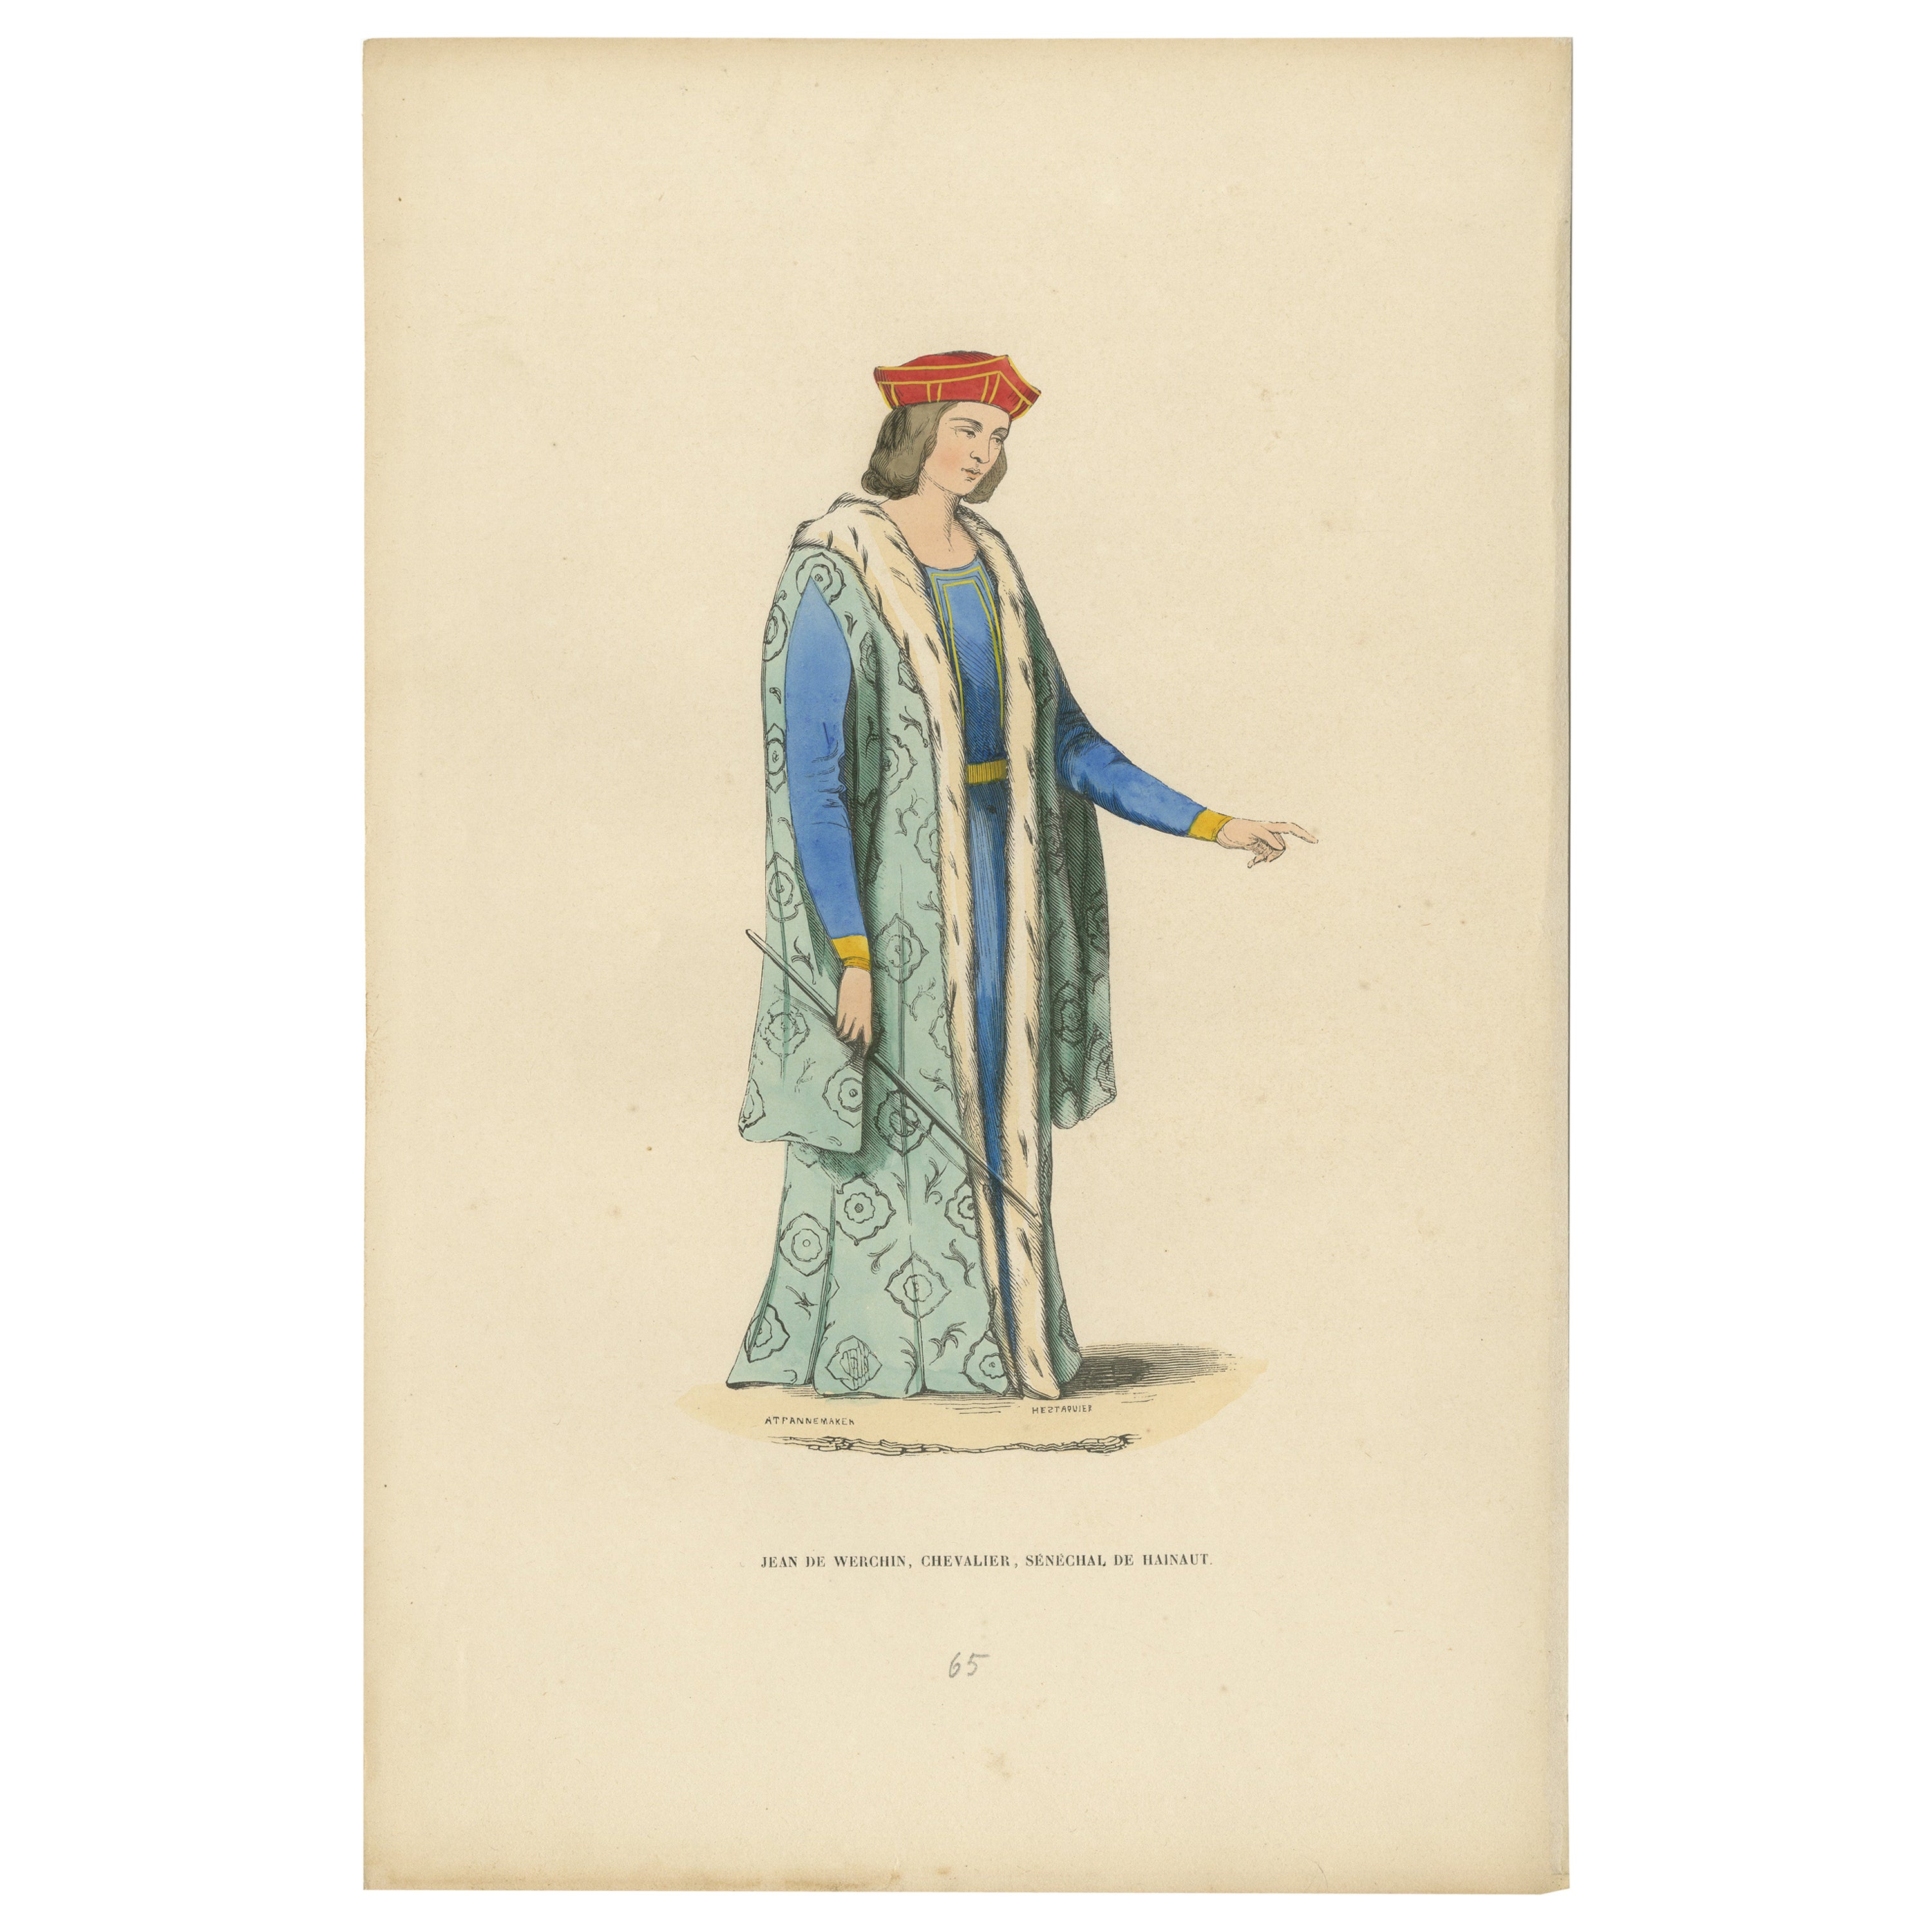 Jean de Werchin, a Knight and Seneschal of Hainaut: The Knight's Poise, 1847 For Sale